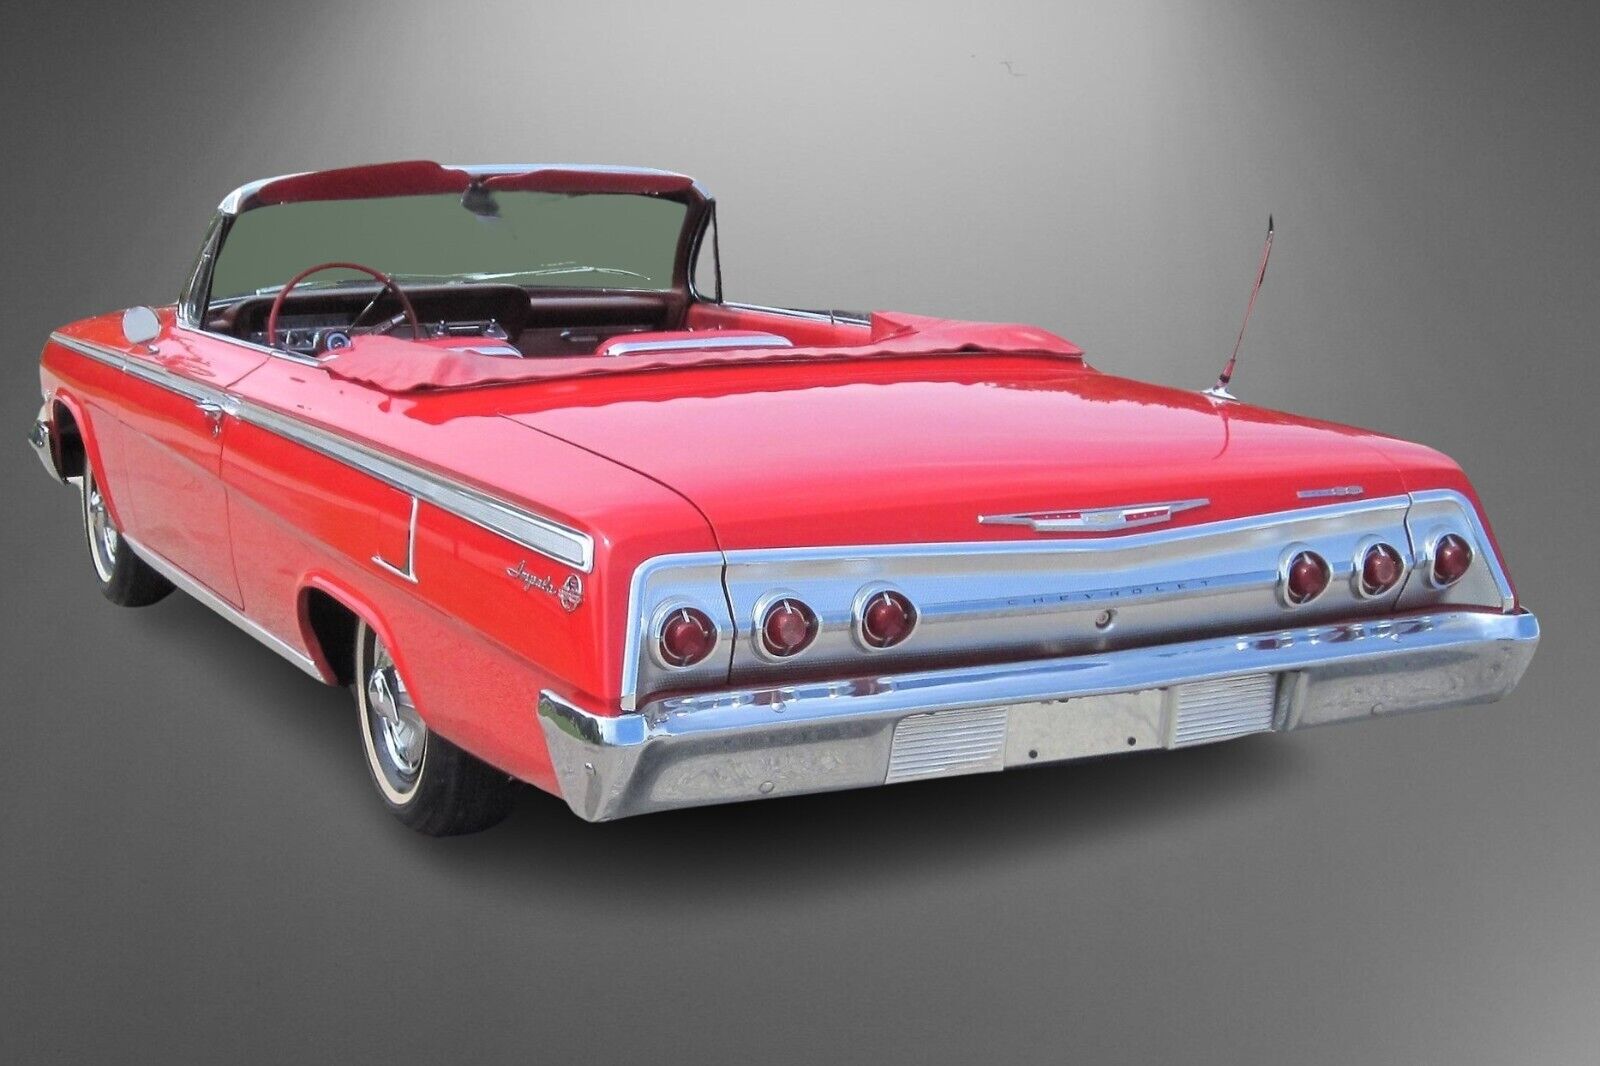 1962 Chevy Impala SS 409 13x19 Poster Style PhotoArt 10m HQ Chevrolet Roman Red